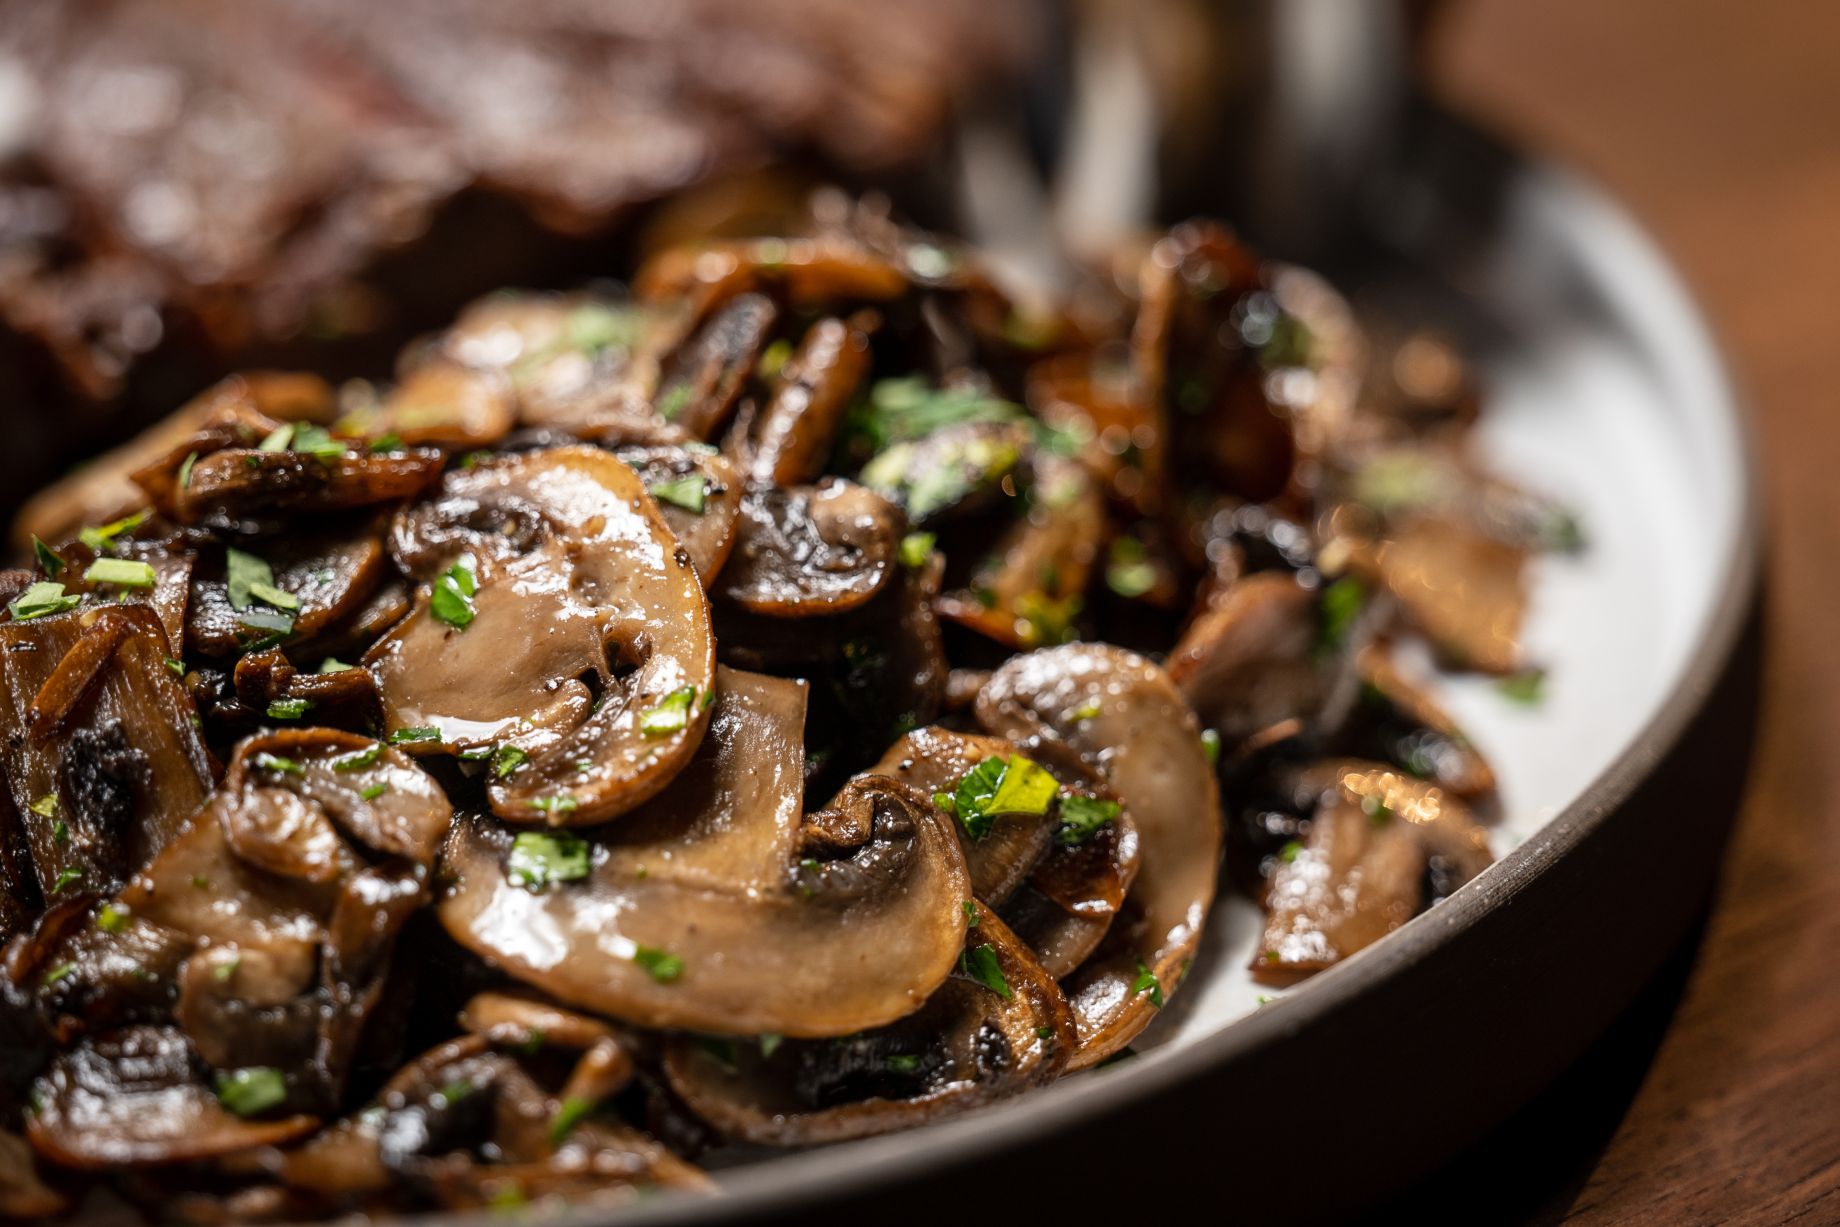 Sauteed mushrooms in a black bowl garnished with parsley.